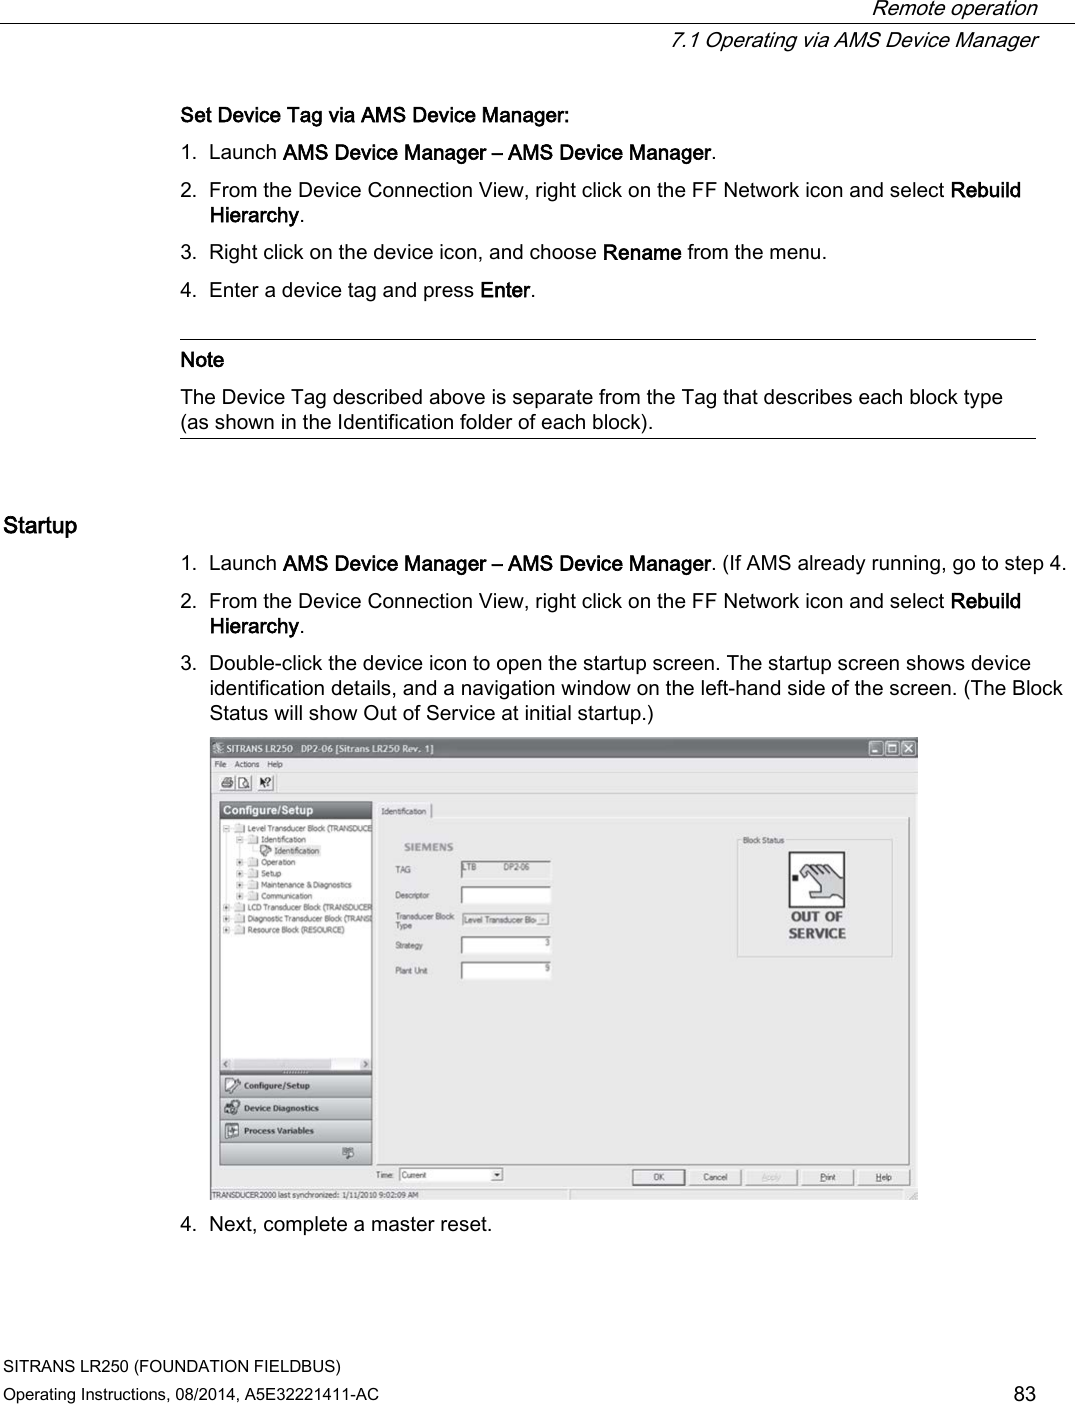  Remote operation  7.1 Operating via AMS Device Manager SITRANS LR250 (FOUNDATION FIELDBUS) Operating Instructions, 08/2014, A5E32221411-AC 83 Set Device Tag via AMS Device Manager: 1. Launch AMS Device Manager – AMS Device Manager. 2. From the Device Connection View, right click on the FF Network icon and select Rebuild Hierarchy. 3. Right click on the device icon, and choose Rename from the menu. 4. Enter a device tag and press Enter.   Note The Device Tag described above is separate from the Tag that describes each block type (as shown in the Identification folder of each block).  Startup 1. Launch AMS Device Manager – AMS Device Manager. (If AMS already running, go to step 4. 2. From the Device Connection View, right click on the FF Network icon and select Rebuild Hierarchy. 3. Double-click the device icon to open the startup screen. The startup screen shows device identification details, and a navigation window on the left-hand side of the screen. (The Block Status will show Out of Service at initial startup.)  4. Next, complete a master reset. 